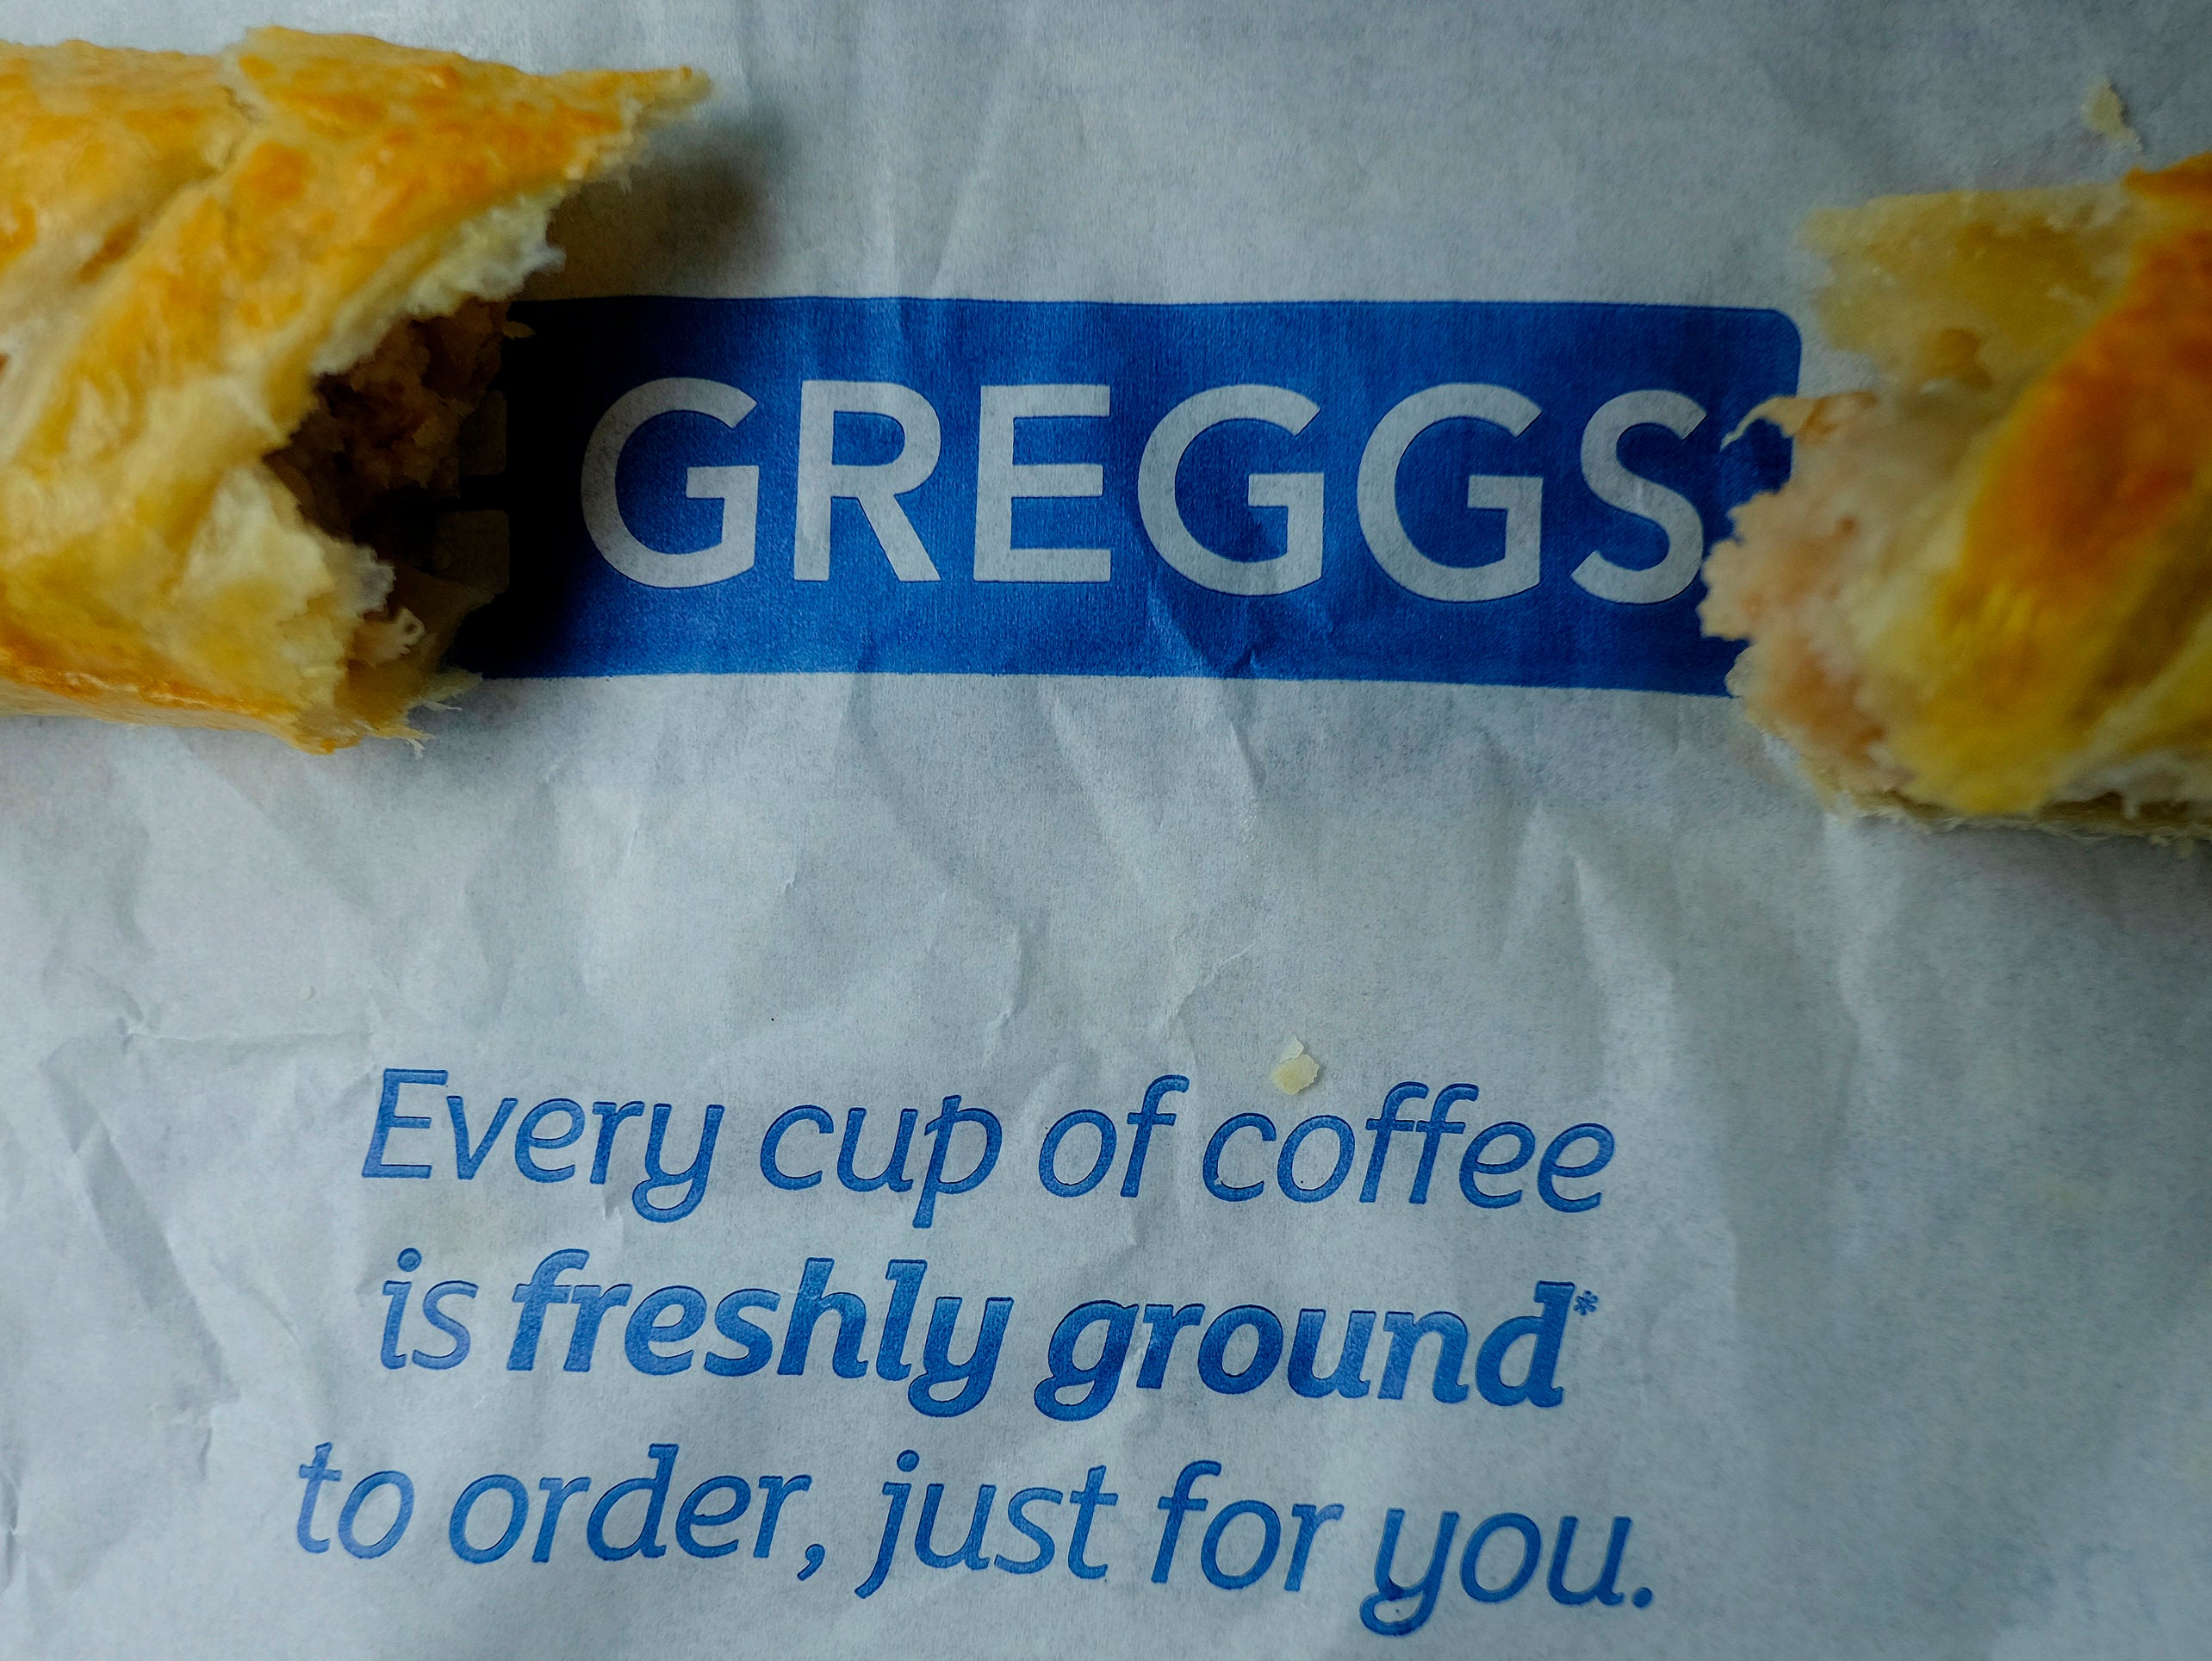 Times diary reporter who cut ribbon to new Westminster Greggs bakery says 'dreams can come true'